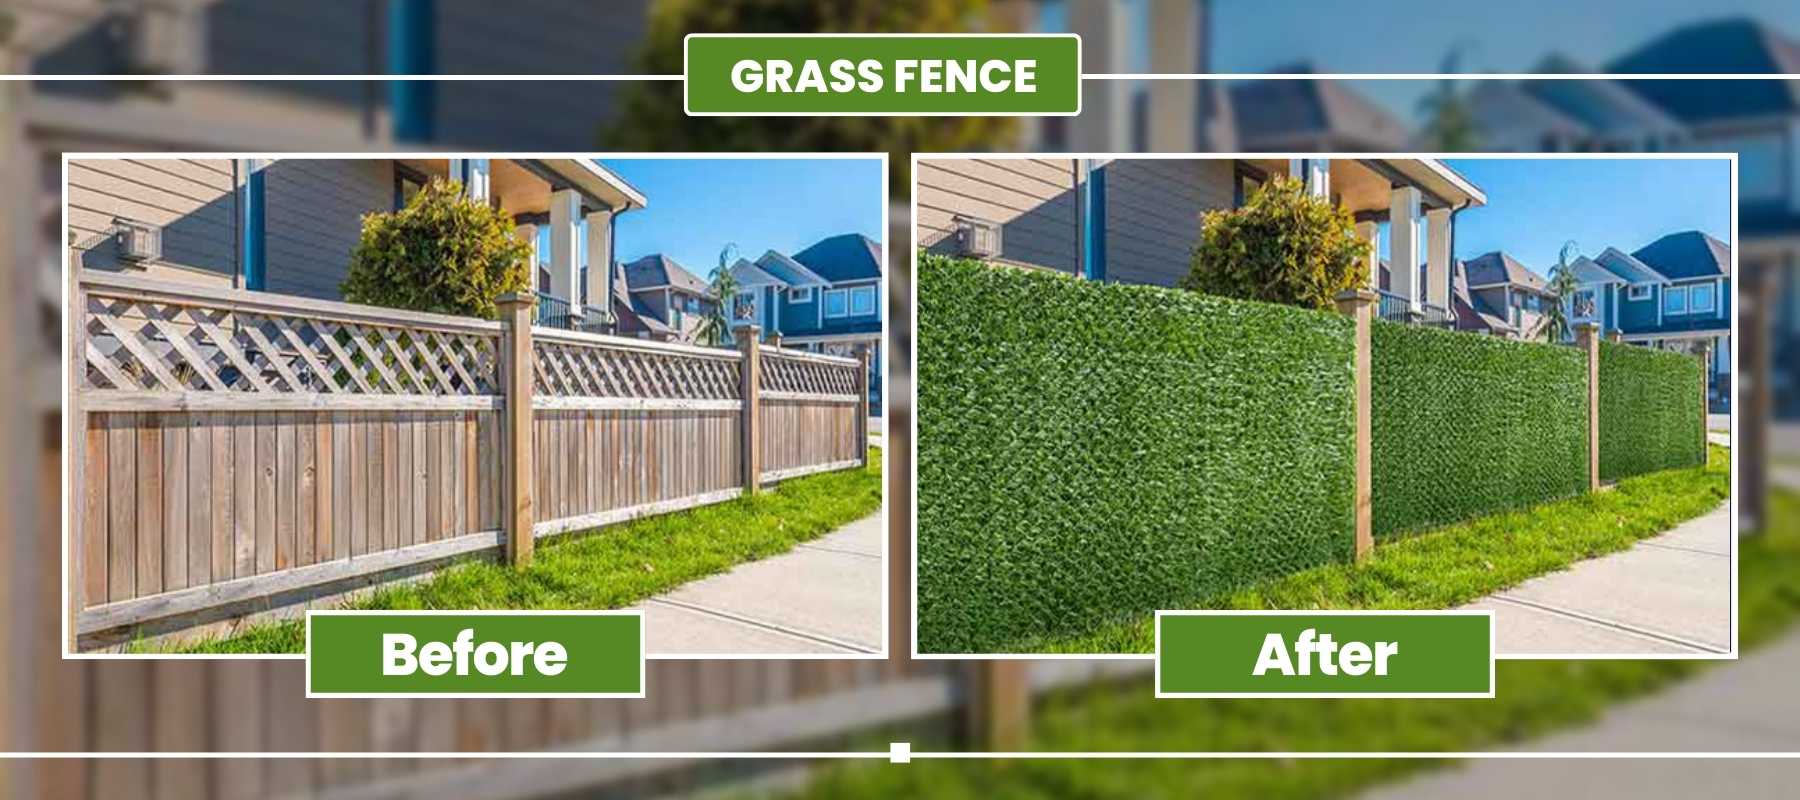 grassfence before after